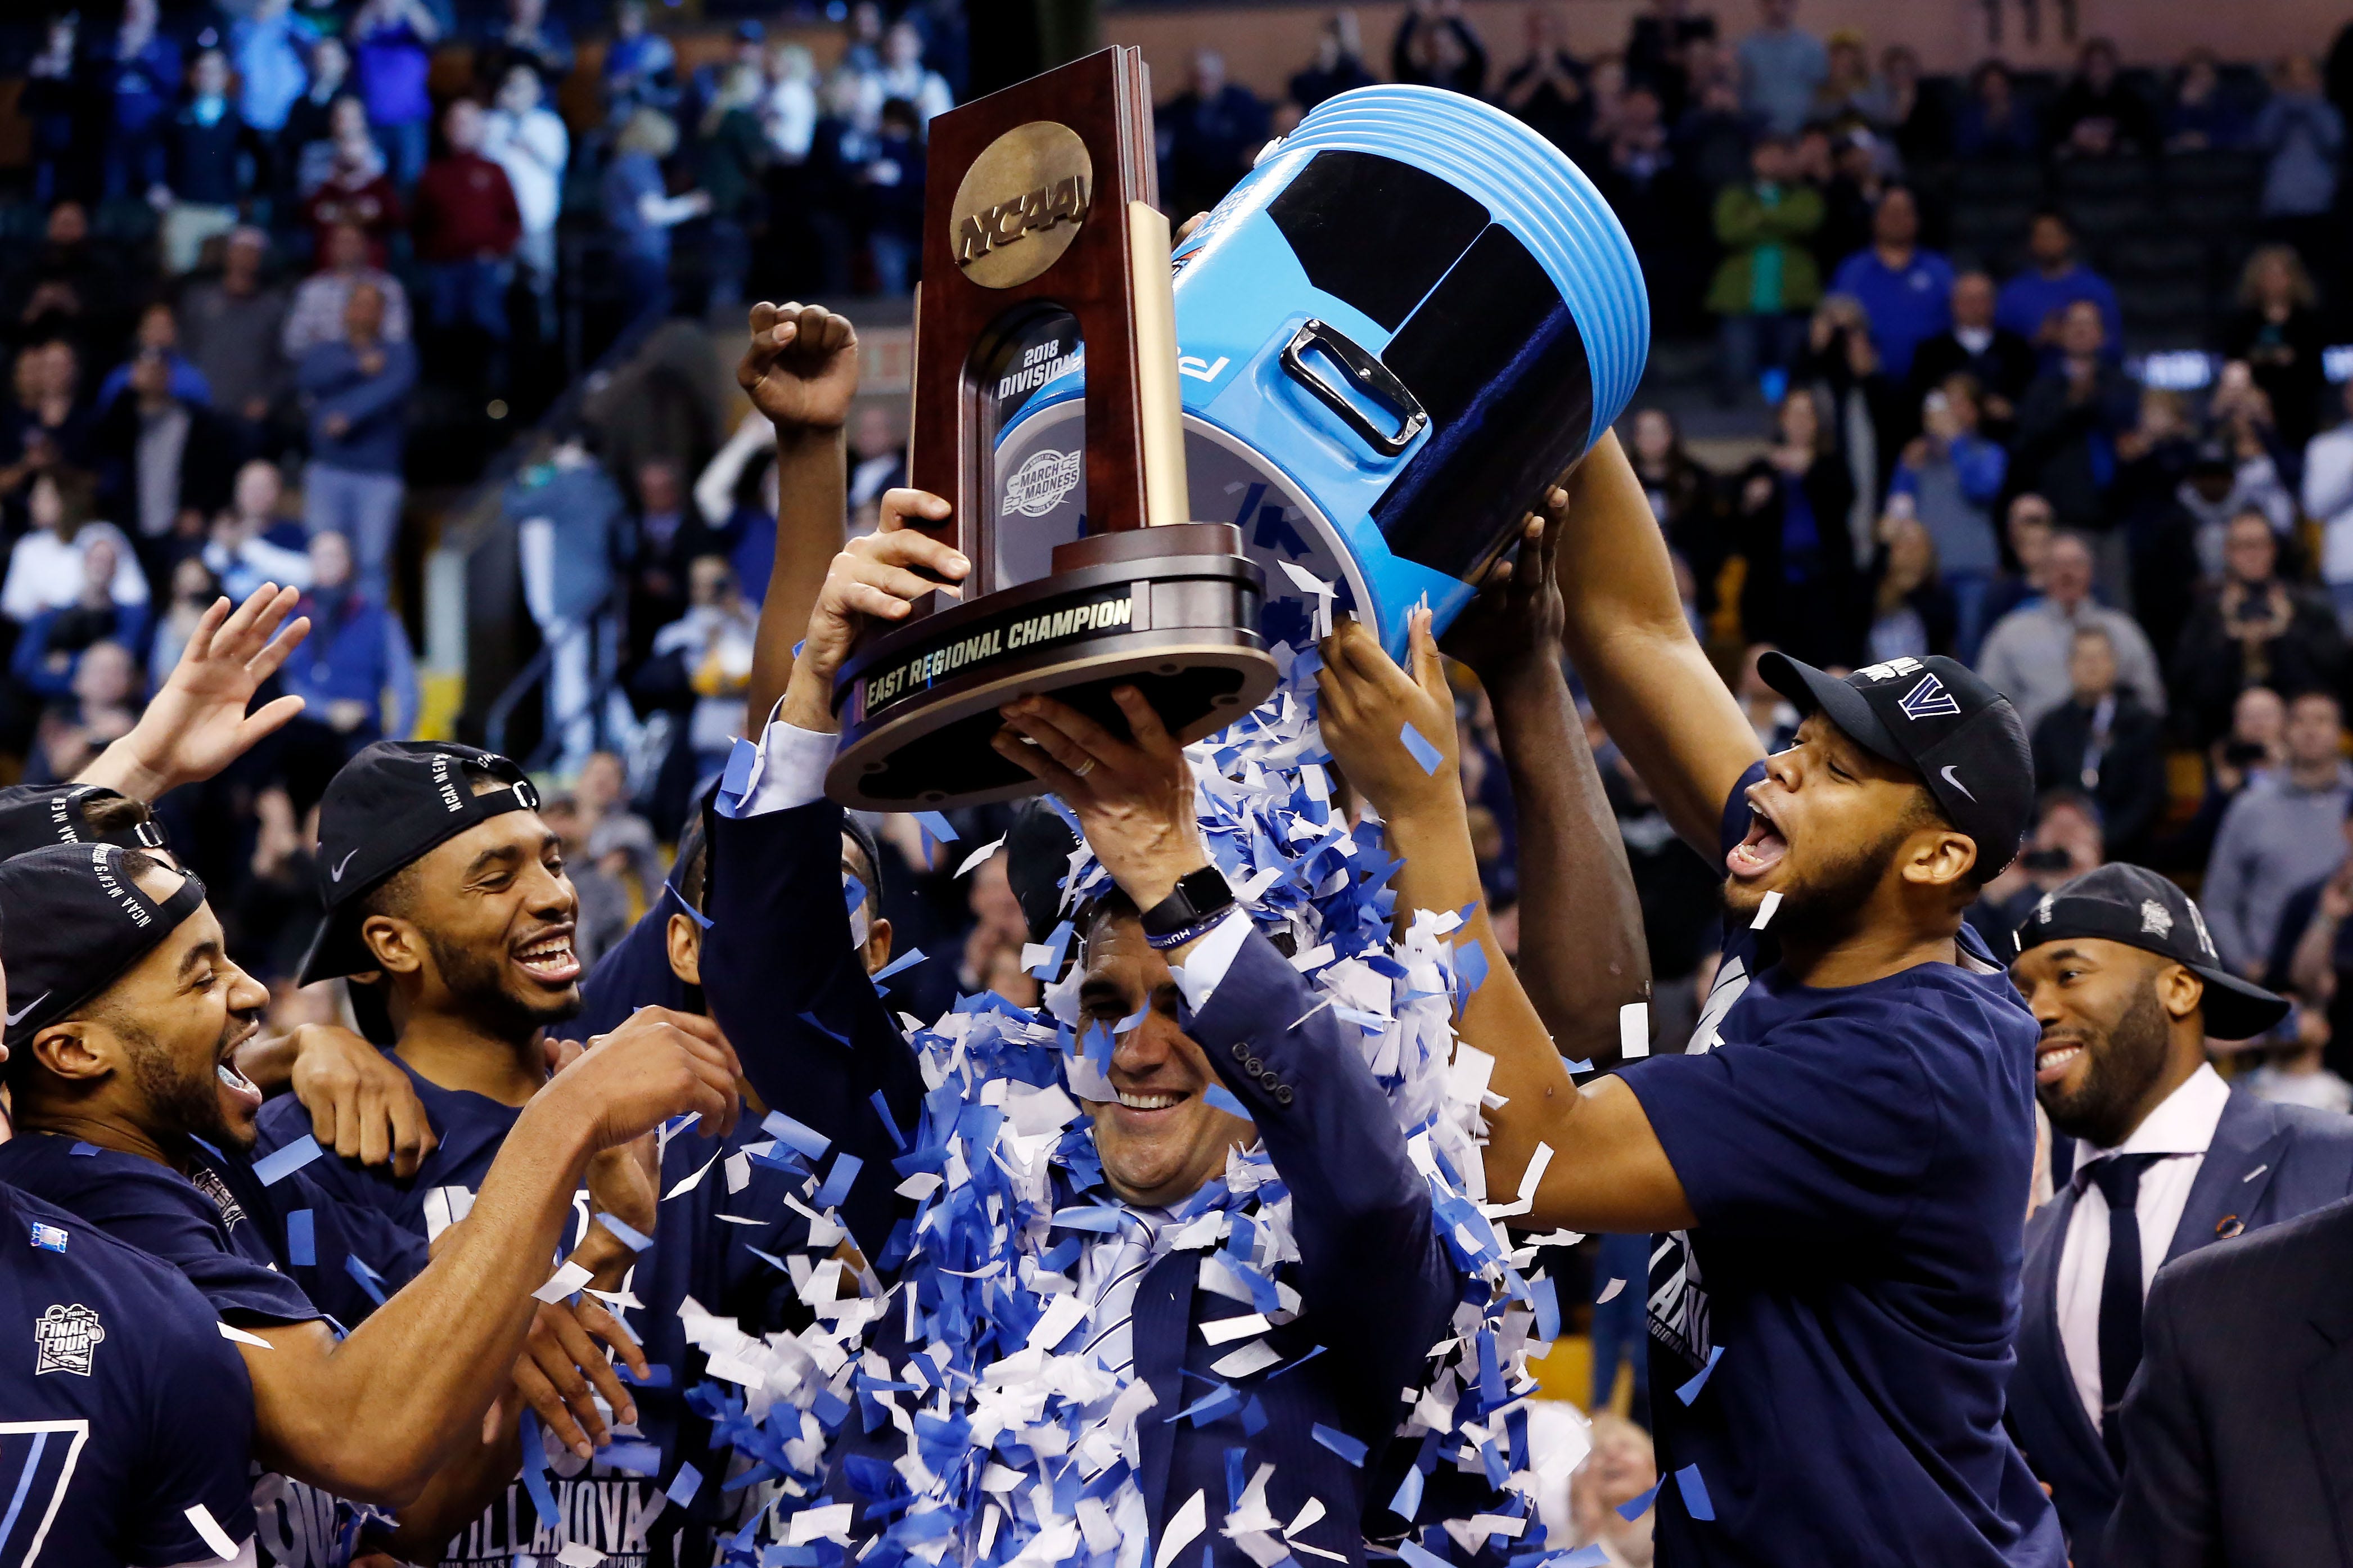 The Villanova Wildcats dump confetti on head coach Jay Wright after defeating the Texas Tech Red Raiders in the championship game of the East regional of the 2018 NCAA Tournament at the TD Garden in Boston.